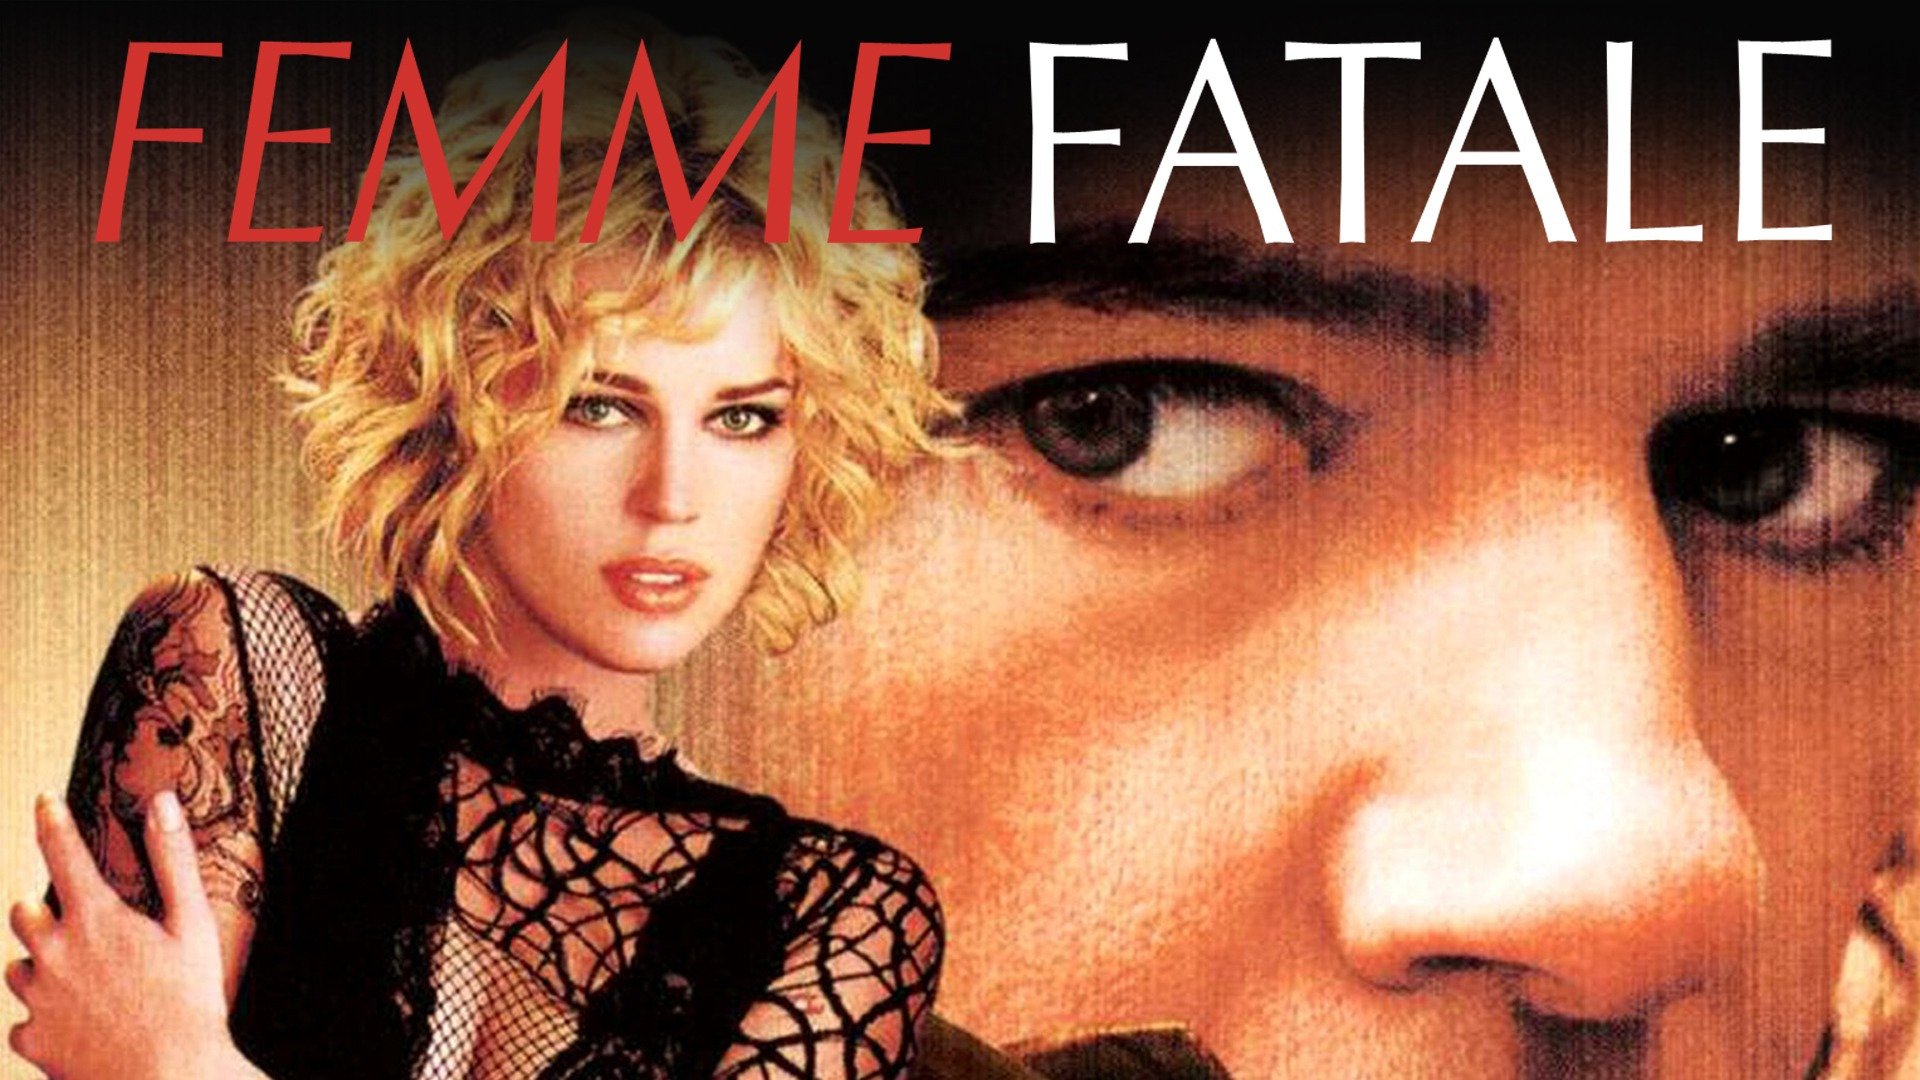 april bowden recommends femme fatale 2002 full movie pic